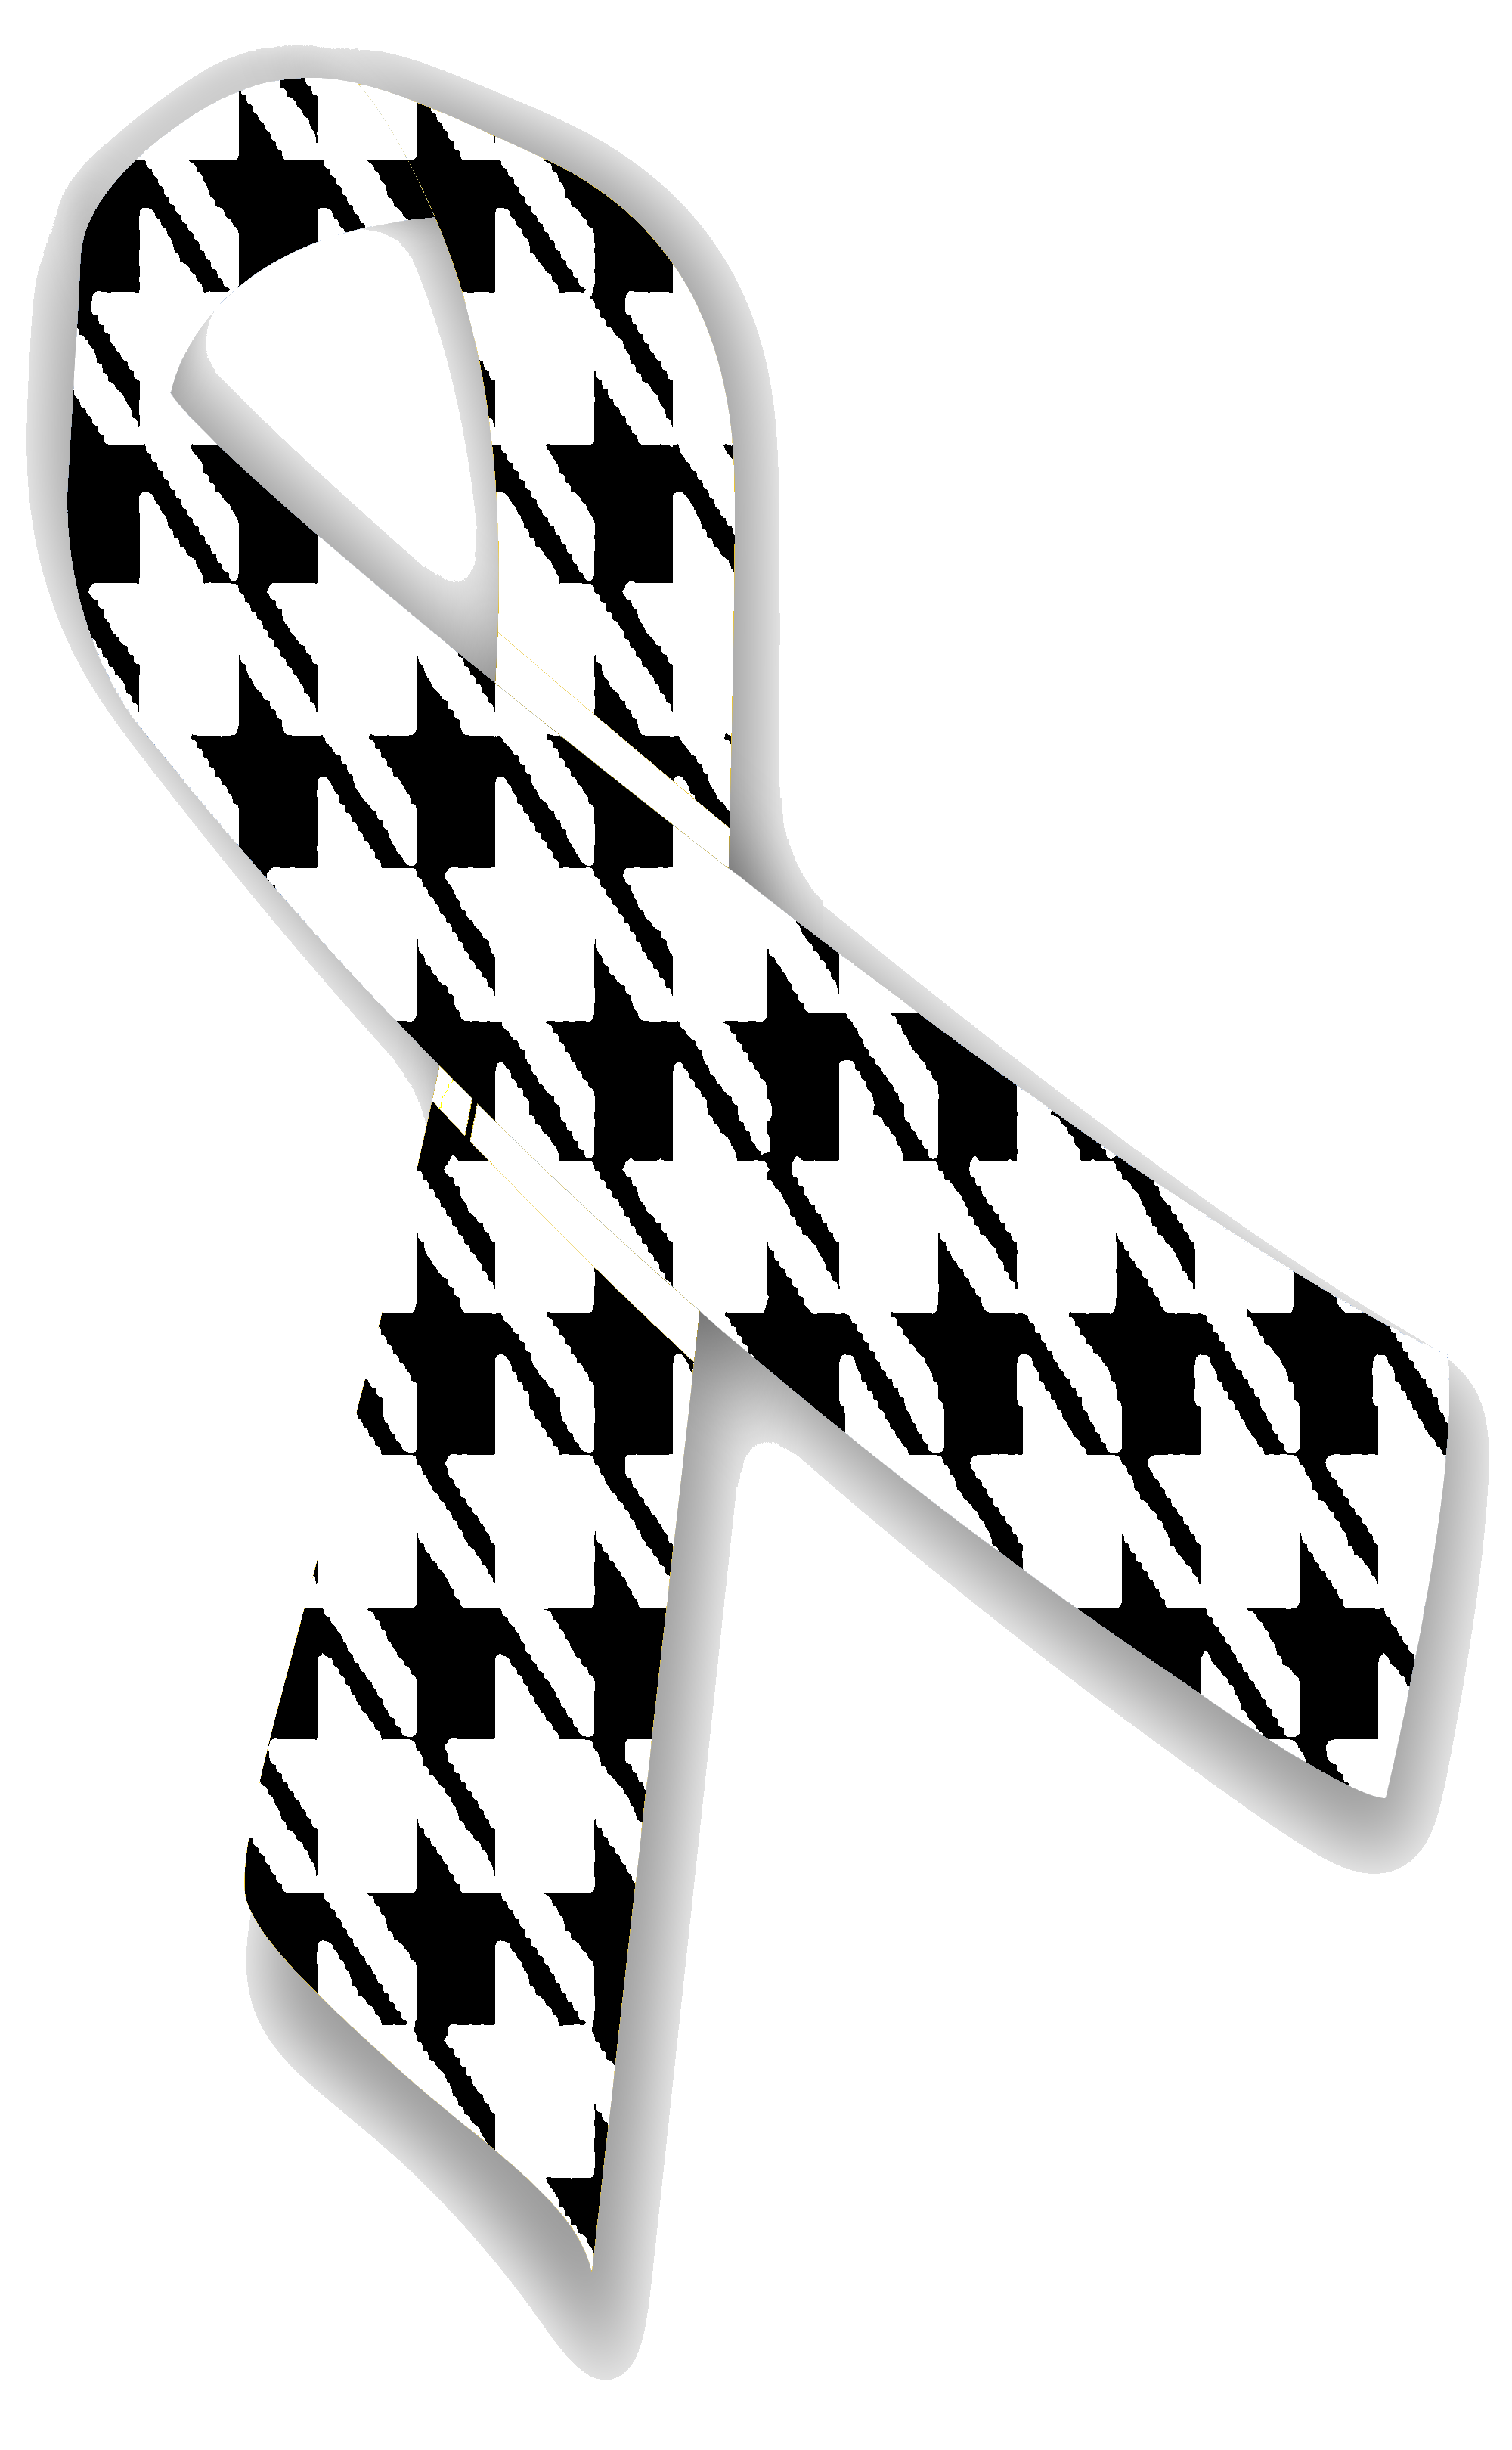 Download List of awareness ribbons - Wikiwand